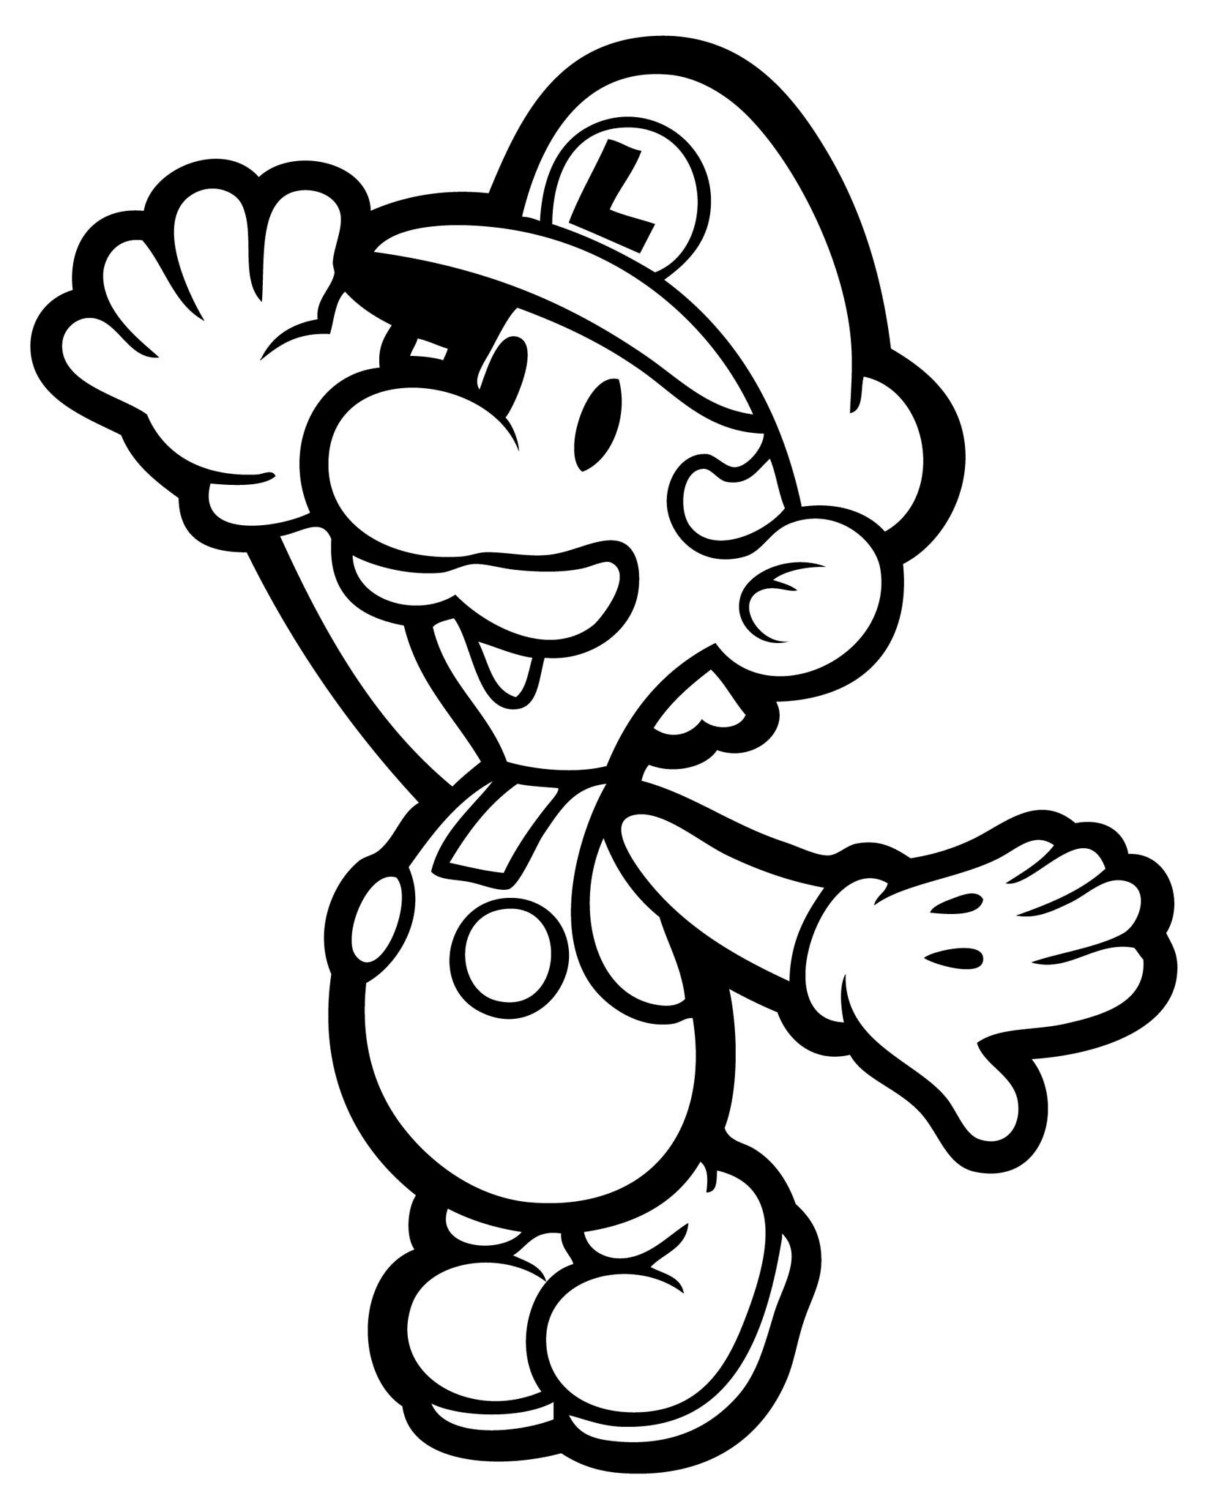  Mario coloring pages | color printing | coloring pages printable | coloring book pages | #41